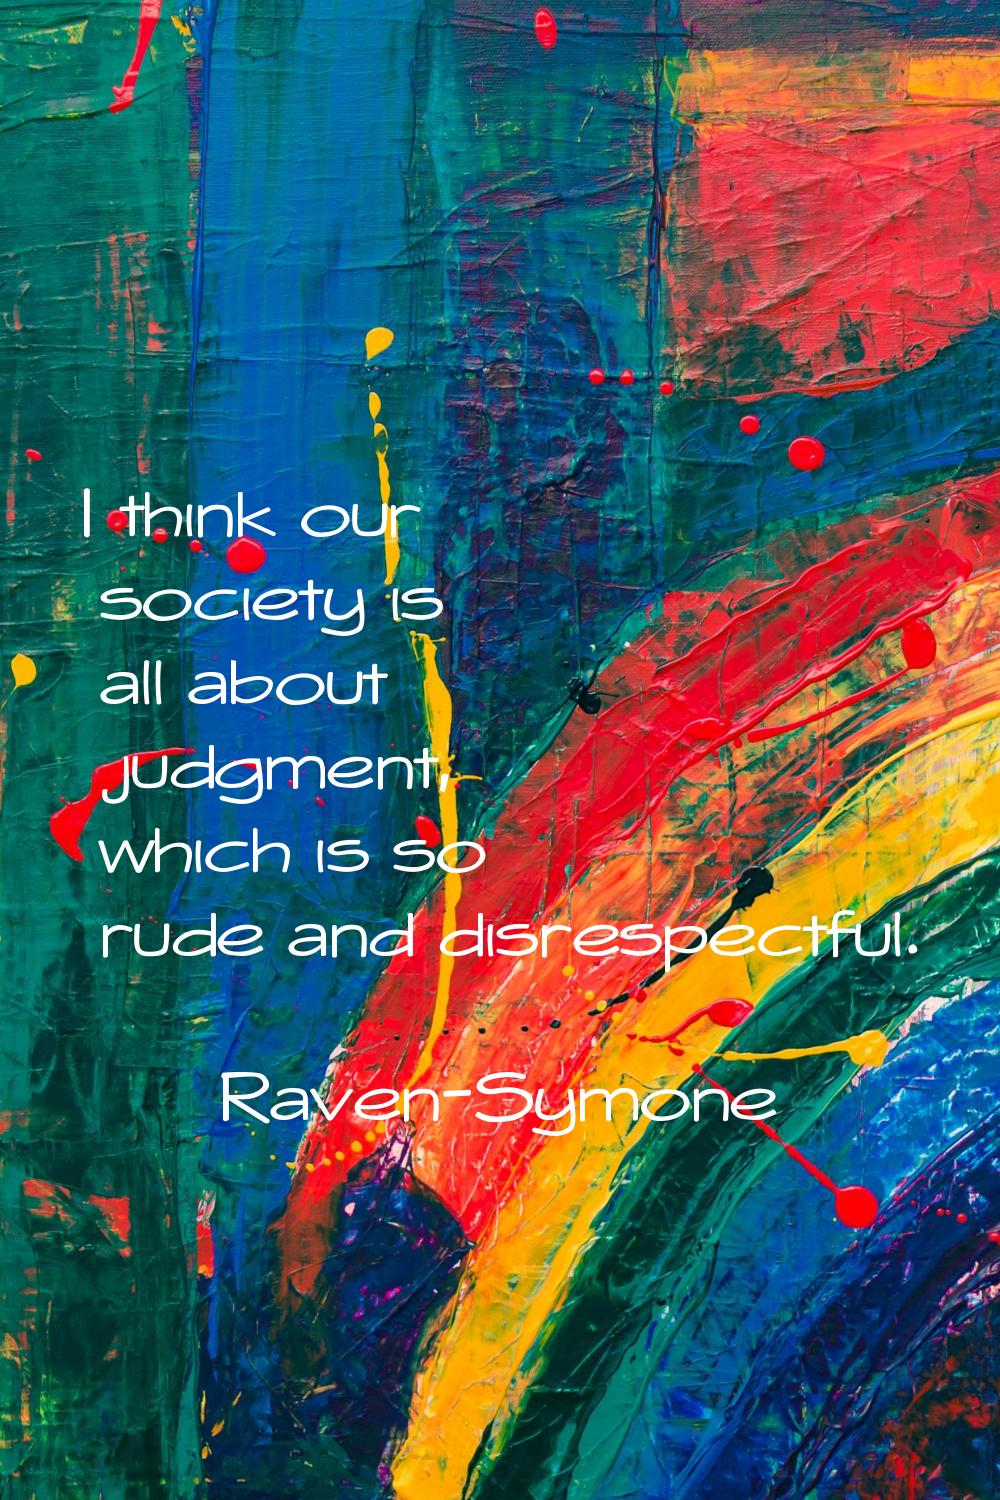 I think our society is all about judgment, which is so rude and disrespectful.